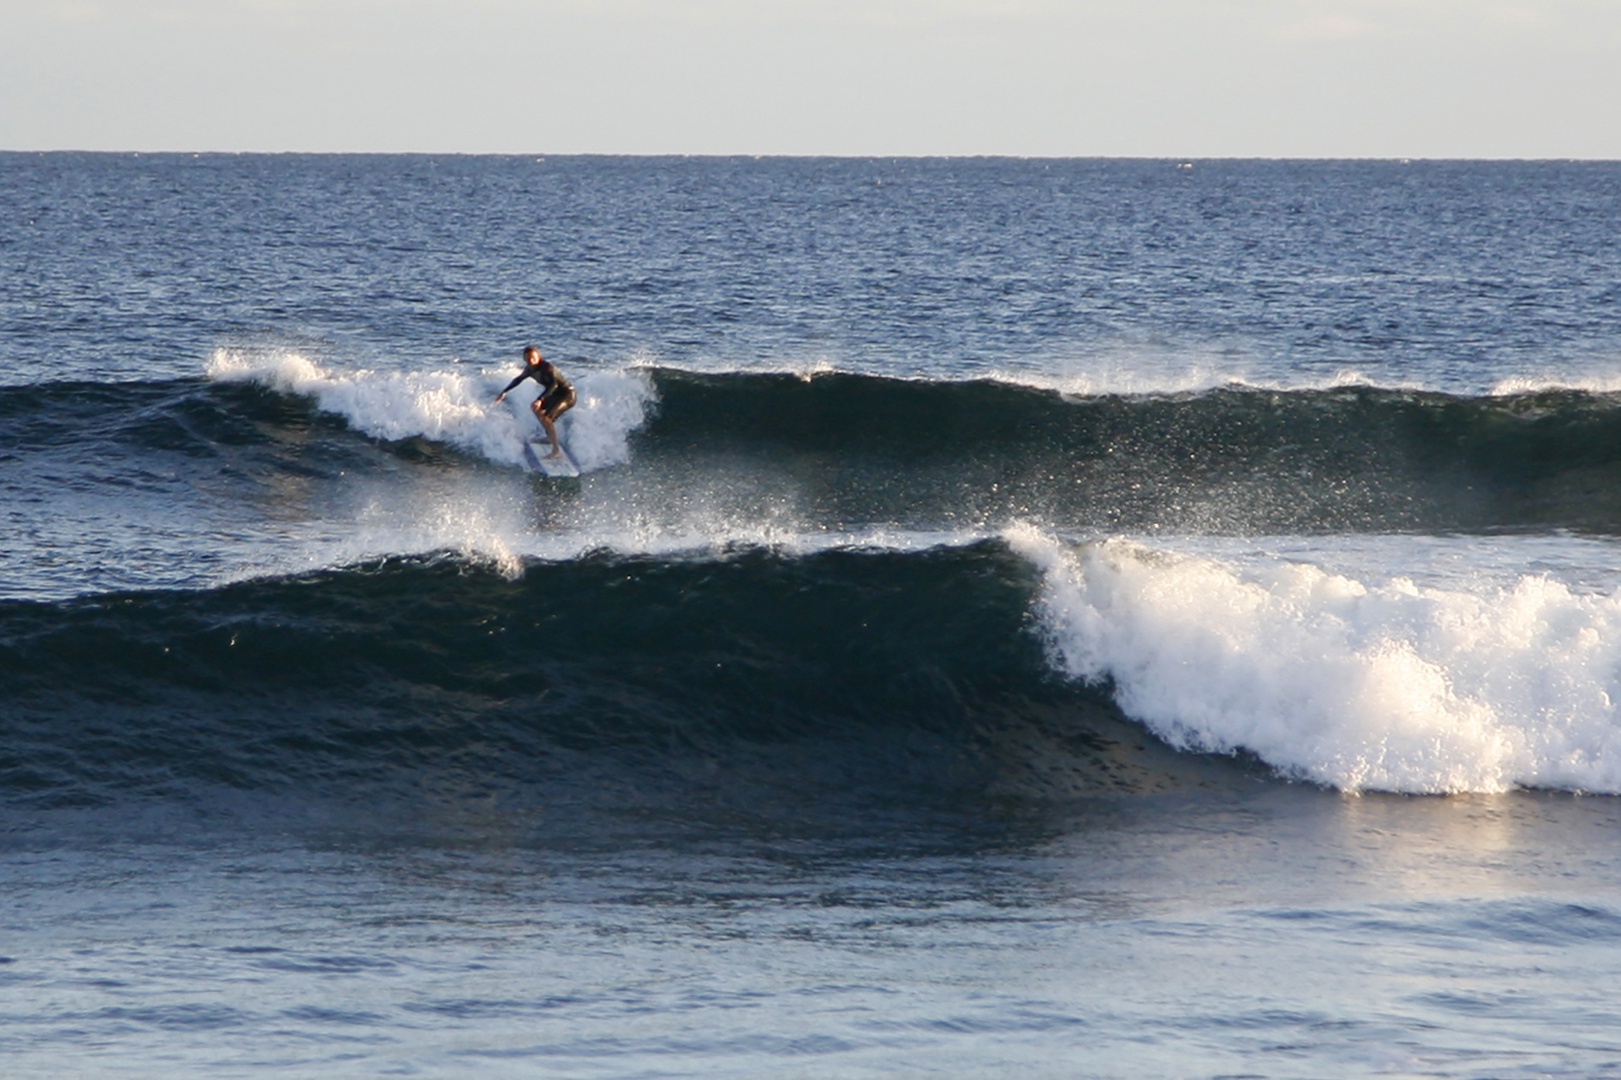 Koloa Vacation Rentals, Pili Mai 11K - The beaches nearby are great locations for surfers